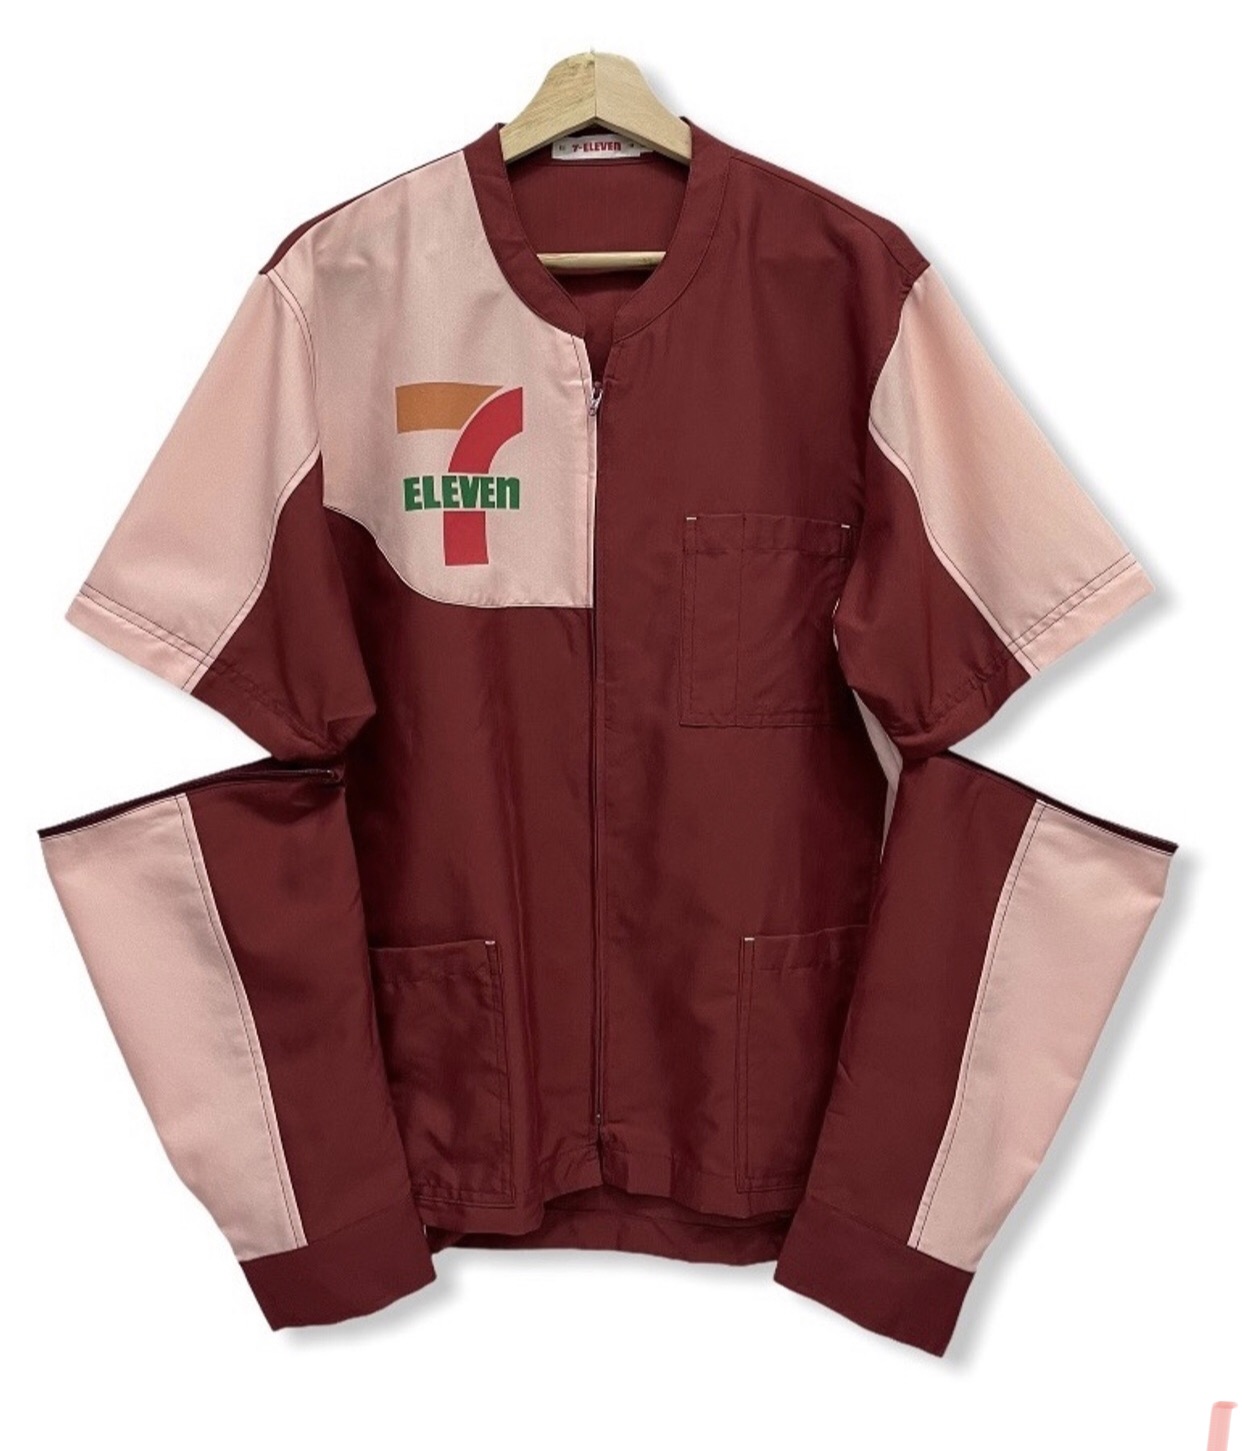 🇯🇵 Vintage 90s 7-Eleven Uniform Workers Collection Shirts - 2